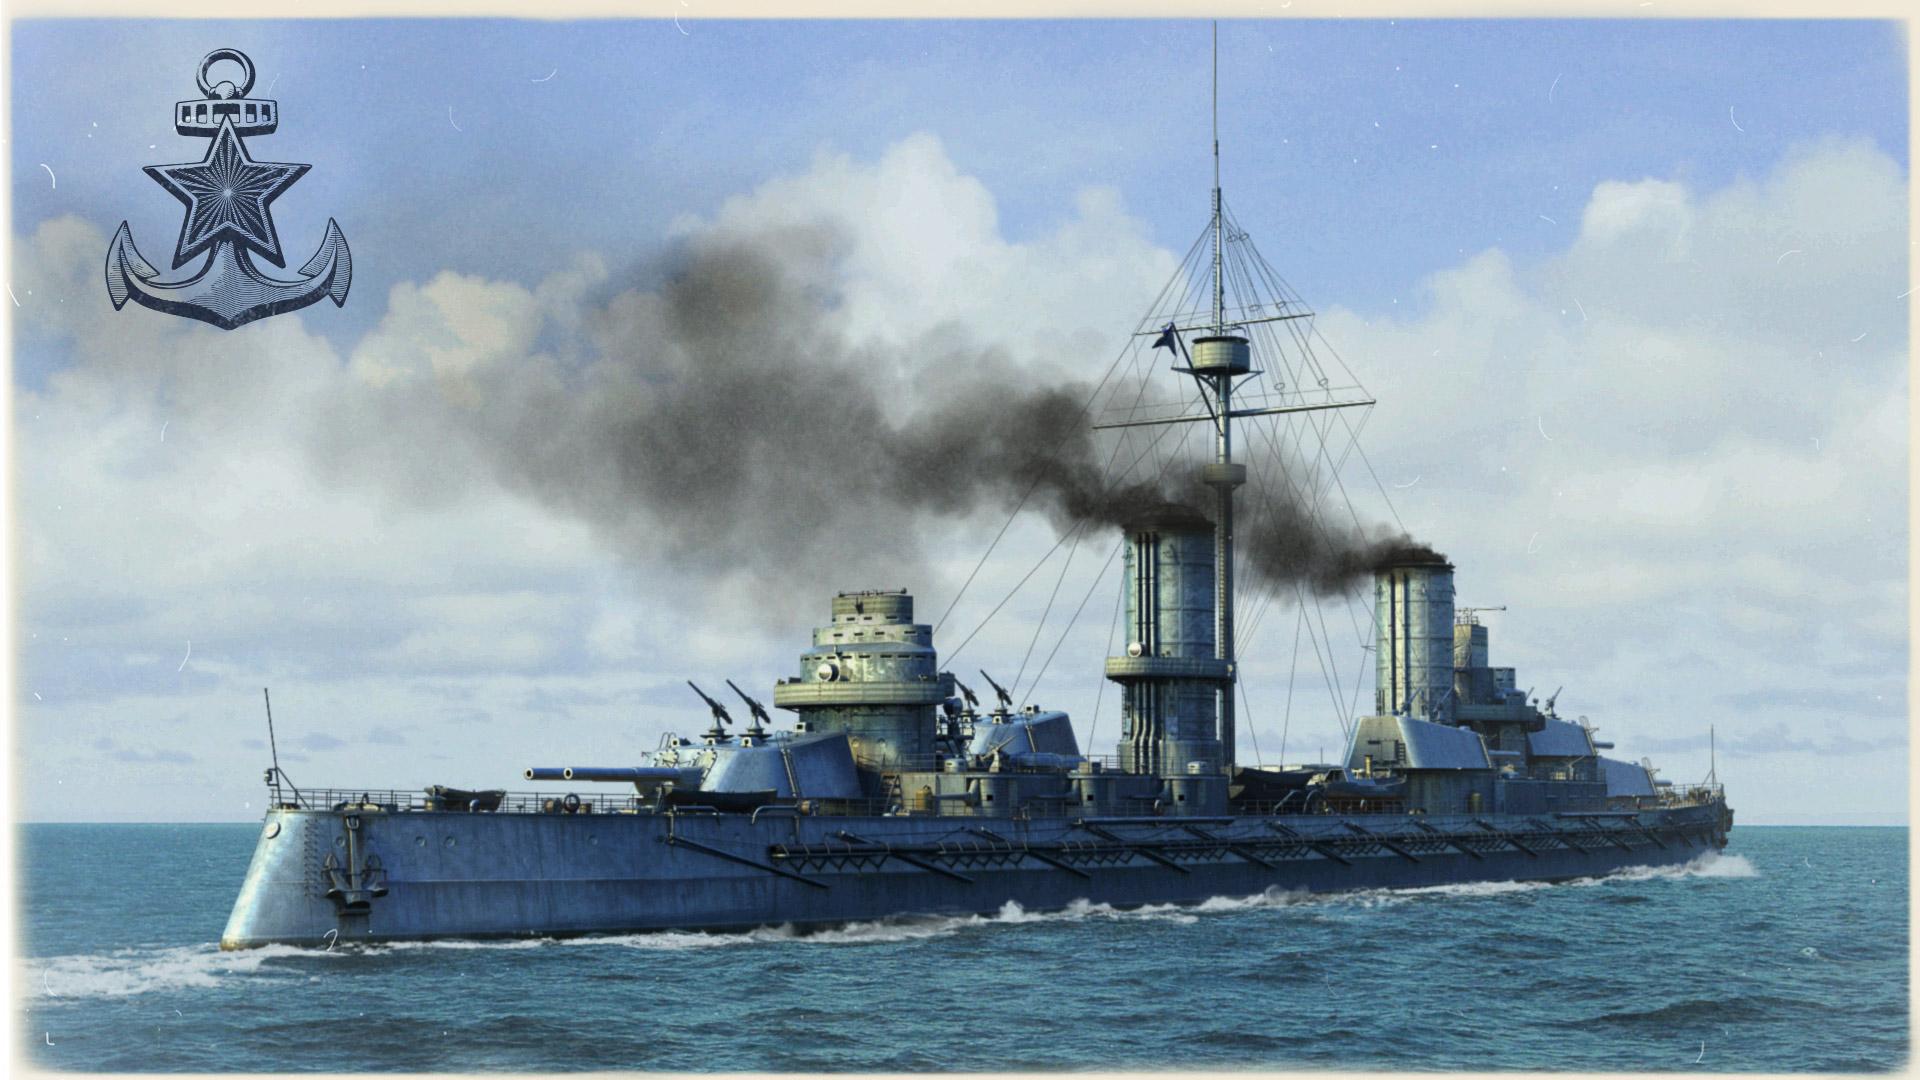 Soviet Battleships: The History And Features Of The In Game Ship